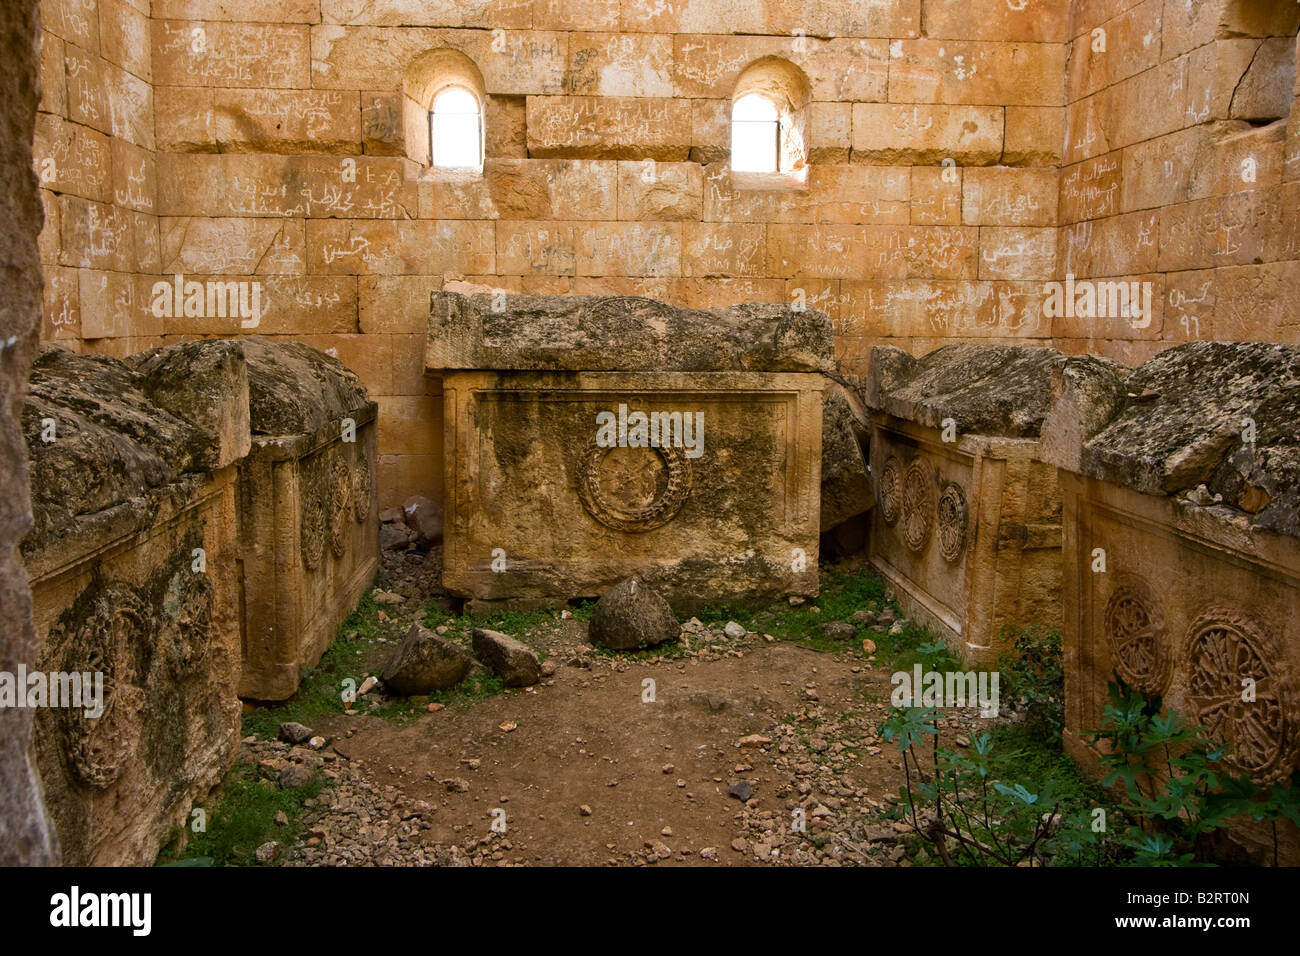 Sarcophagus inside an Ancient Roman Pyramid Tomb Dana One of the Dead Cities in Syria Stock Photo